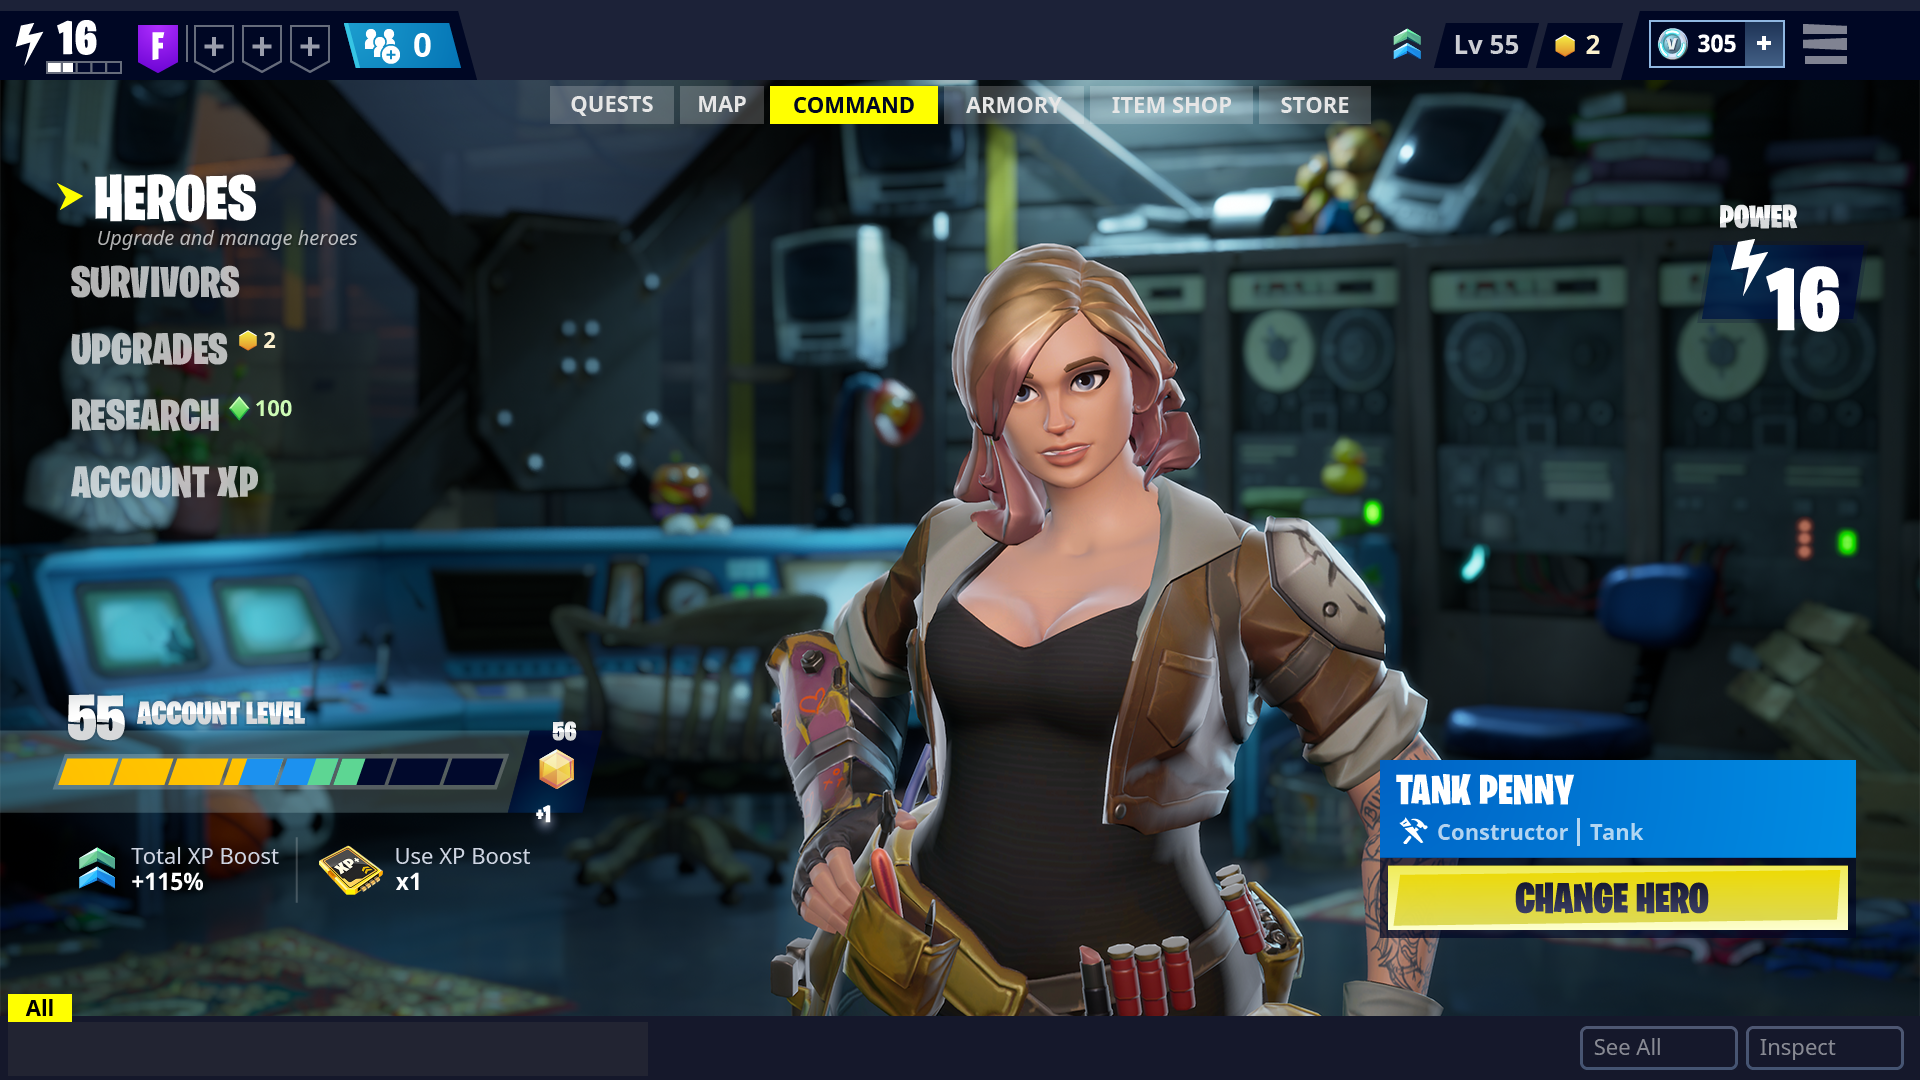 New Menus, New Hero System Coming to Fortnite Save the ...